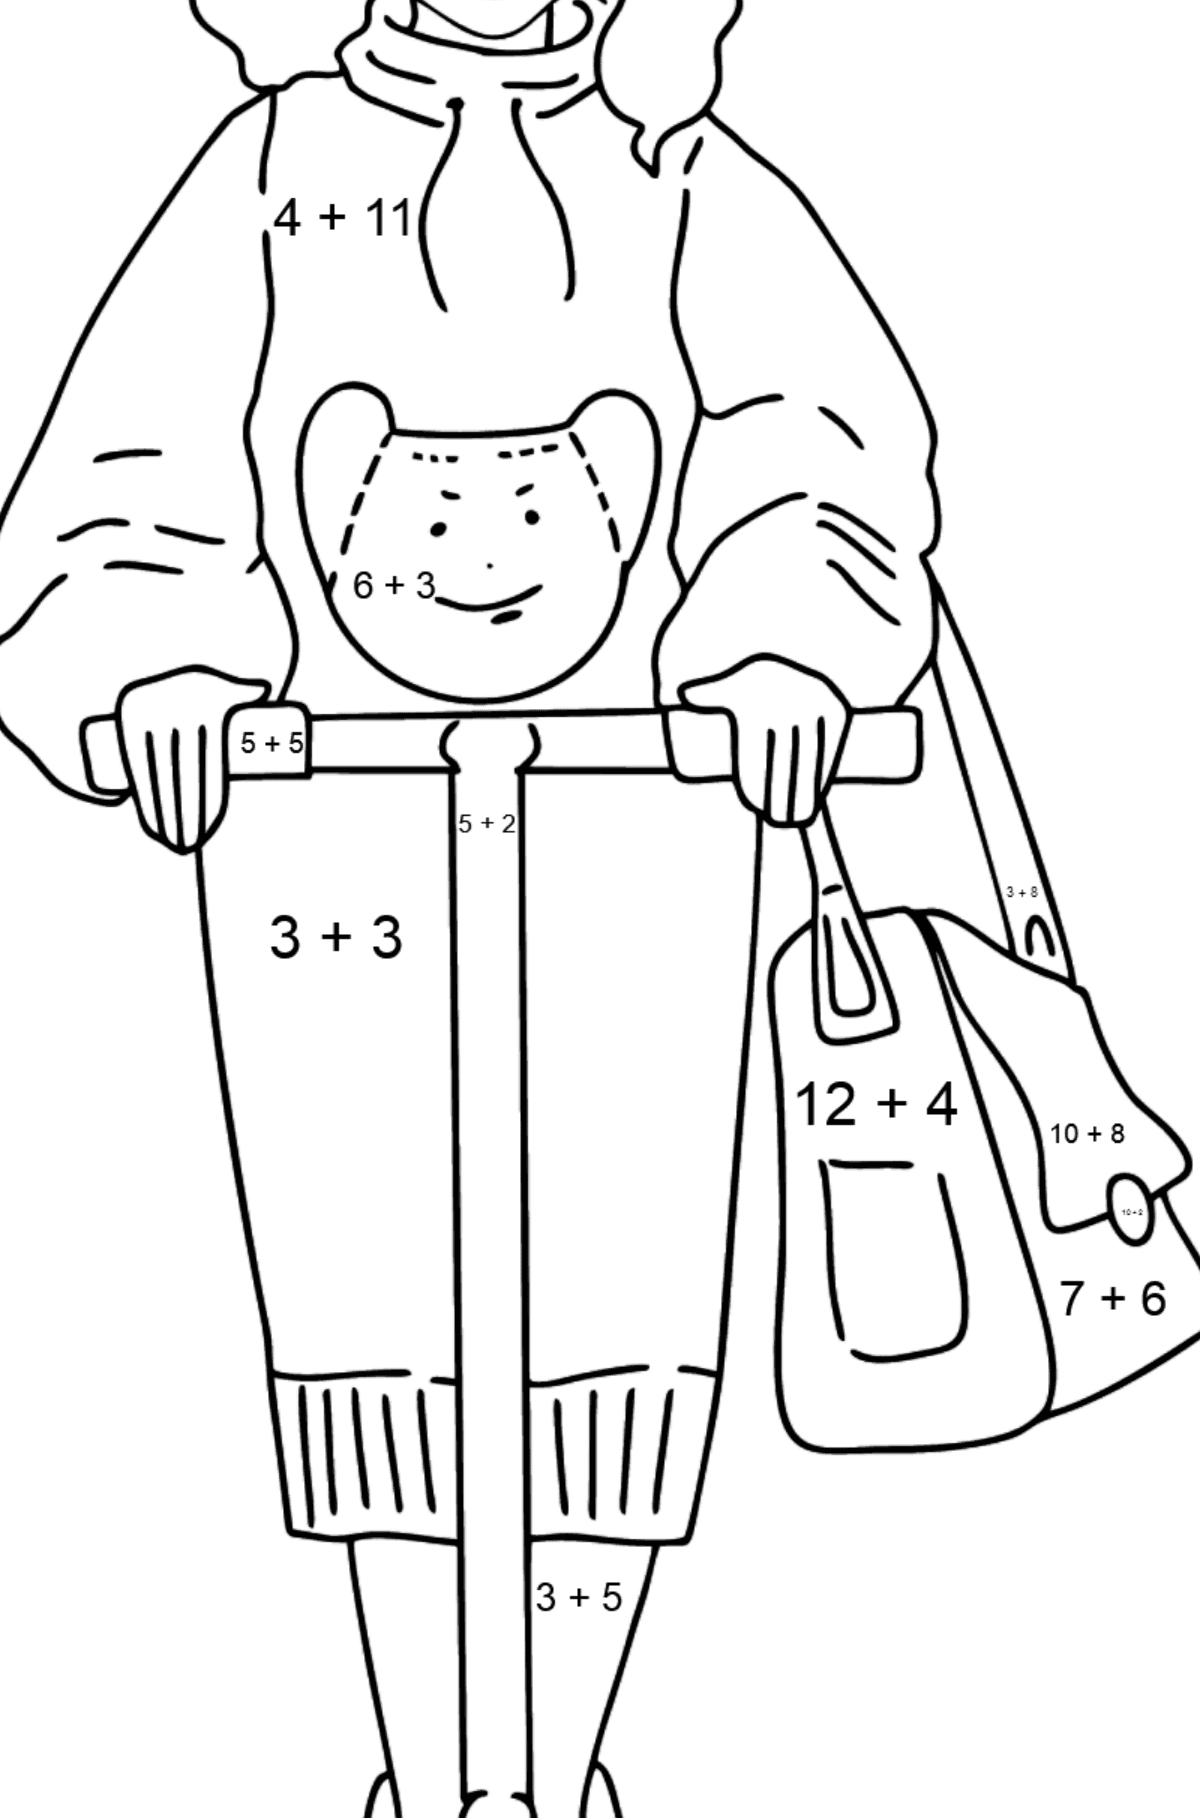 Barbie Doll Riding a Scooter coloring page - Math Coloring - Addition for Kids